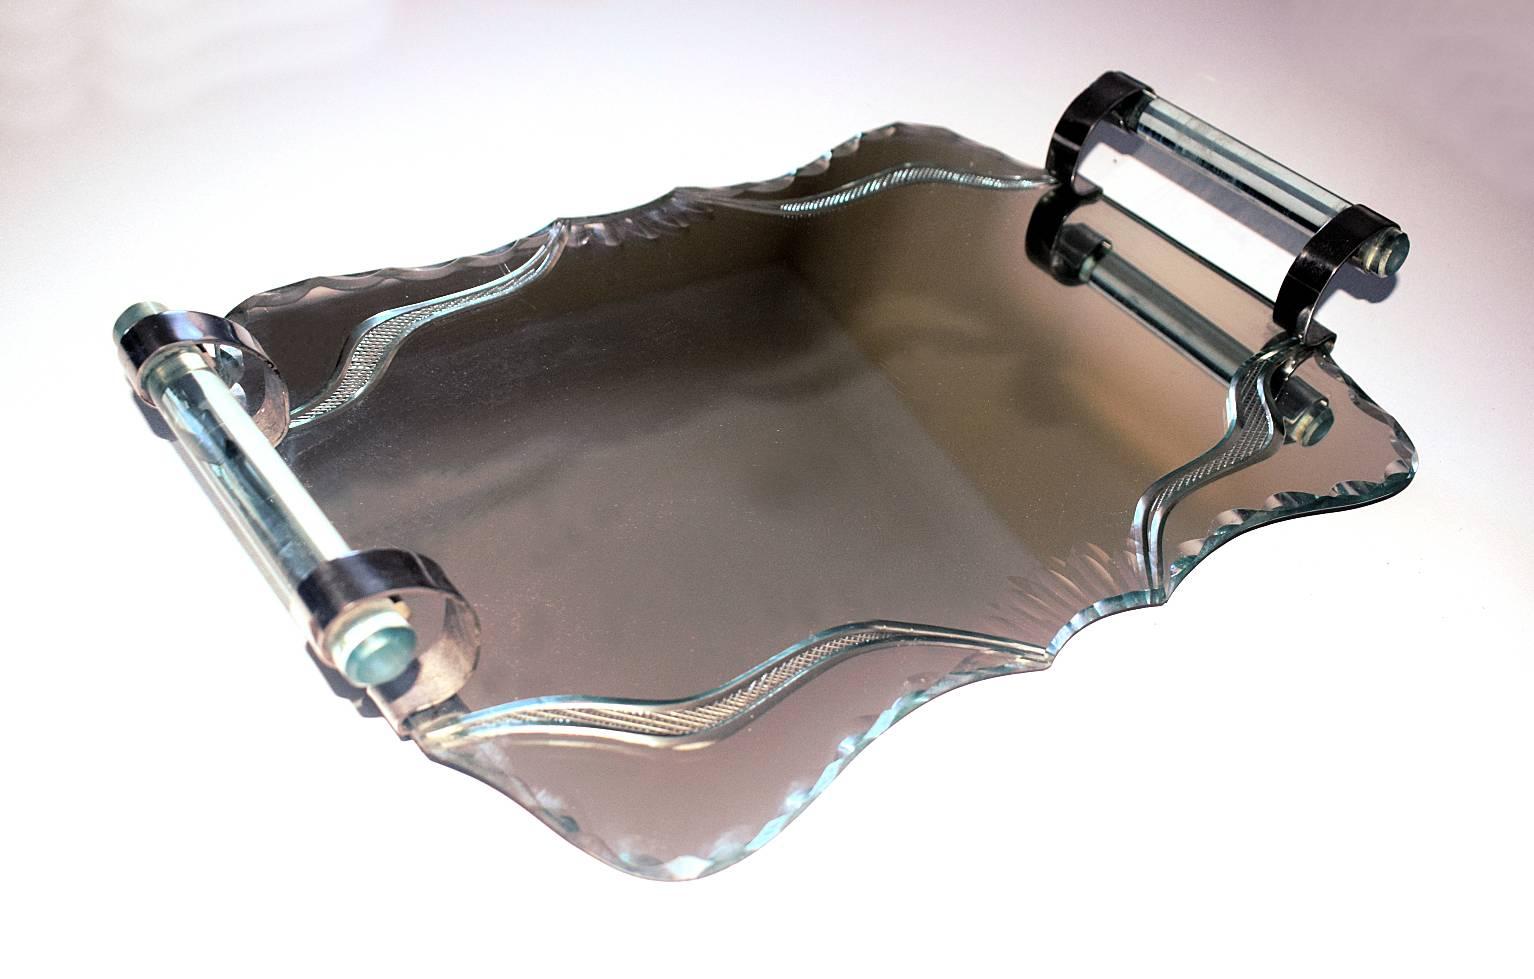 Original, 1930s Art Deco French mirror drinks tray, lovely design, made from mirror and chromed aluminium.
Would look fabulous with cocktail glasses and cocktail shakers adorning it. The mirror is engraved with scalloped pie crust edging.